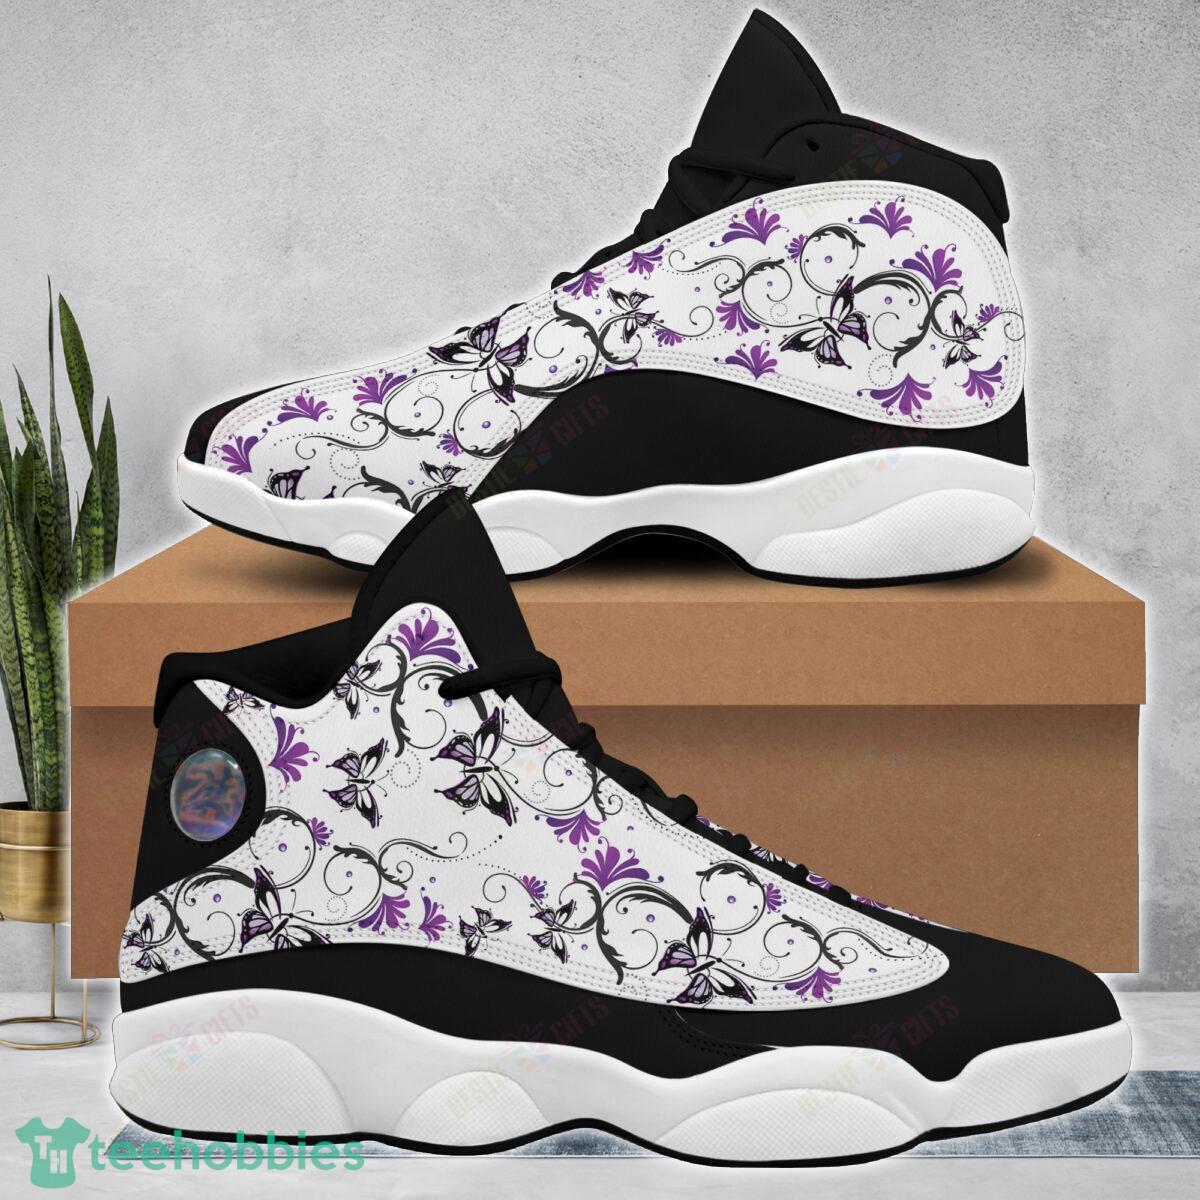 Butterfly And Flower Air Jordan 13 Running Shoes For Men Women Product Photo 1